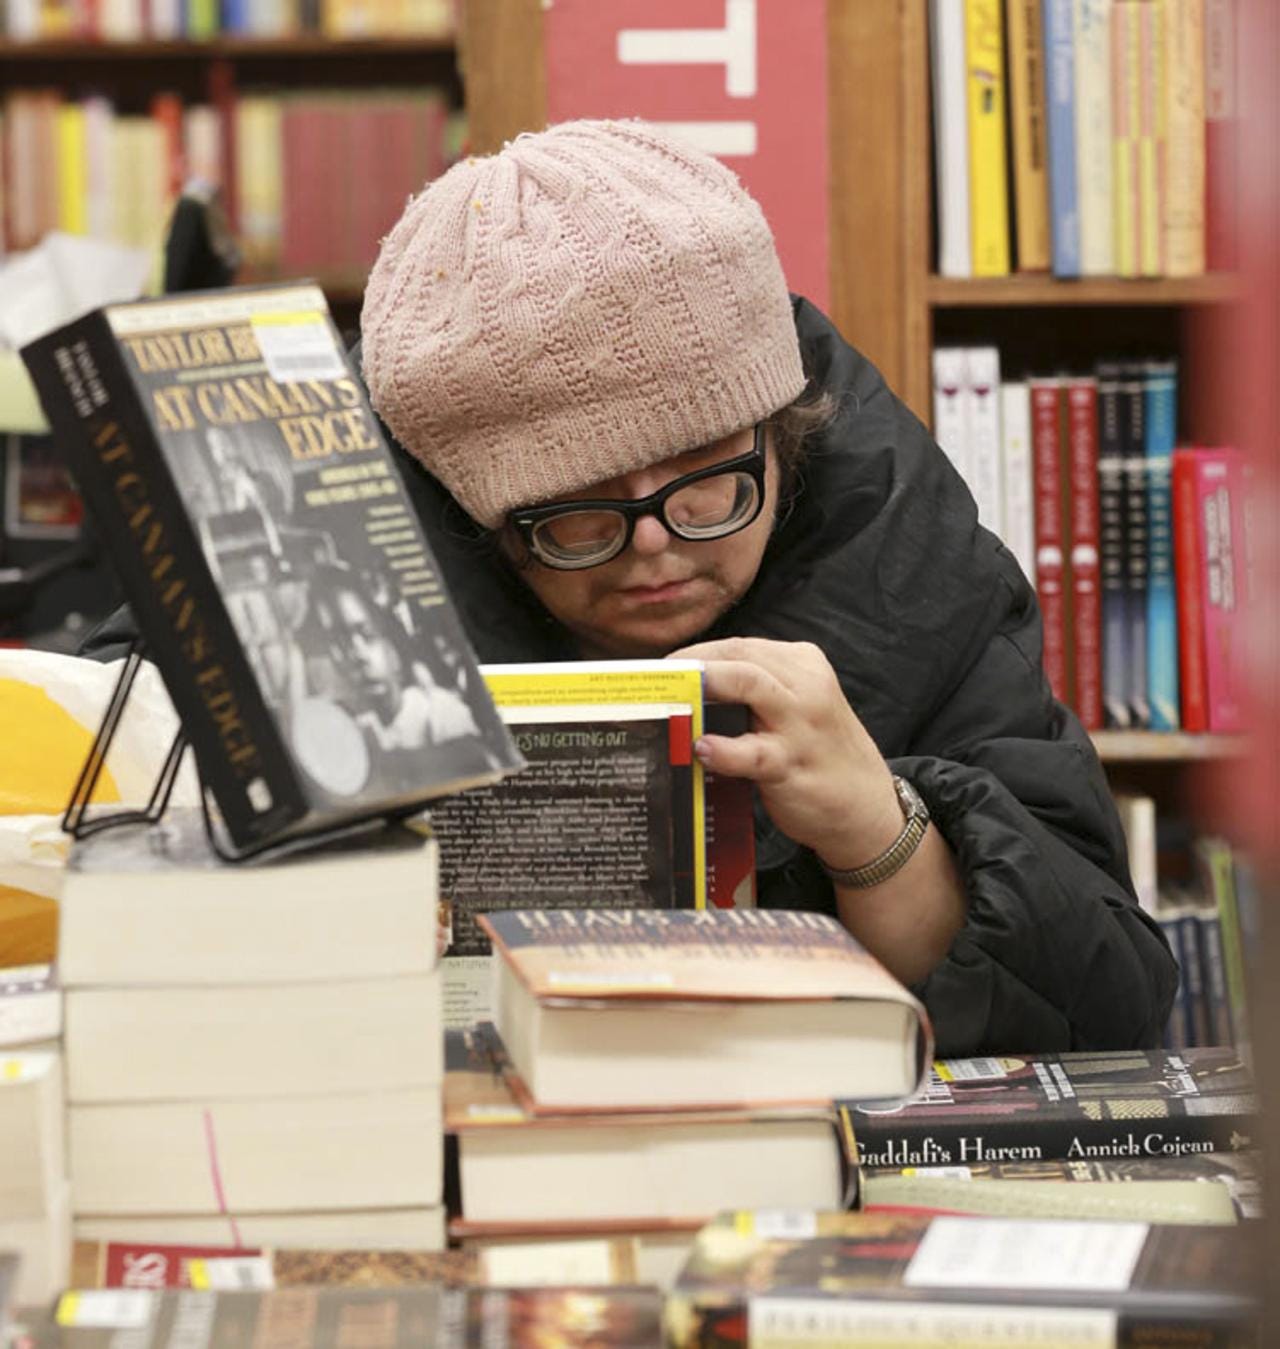 A woman browses books at Strand Book Store.